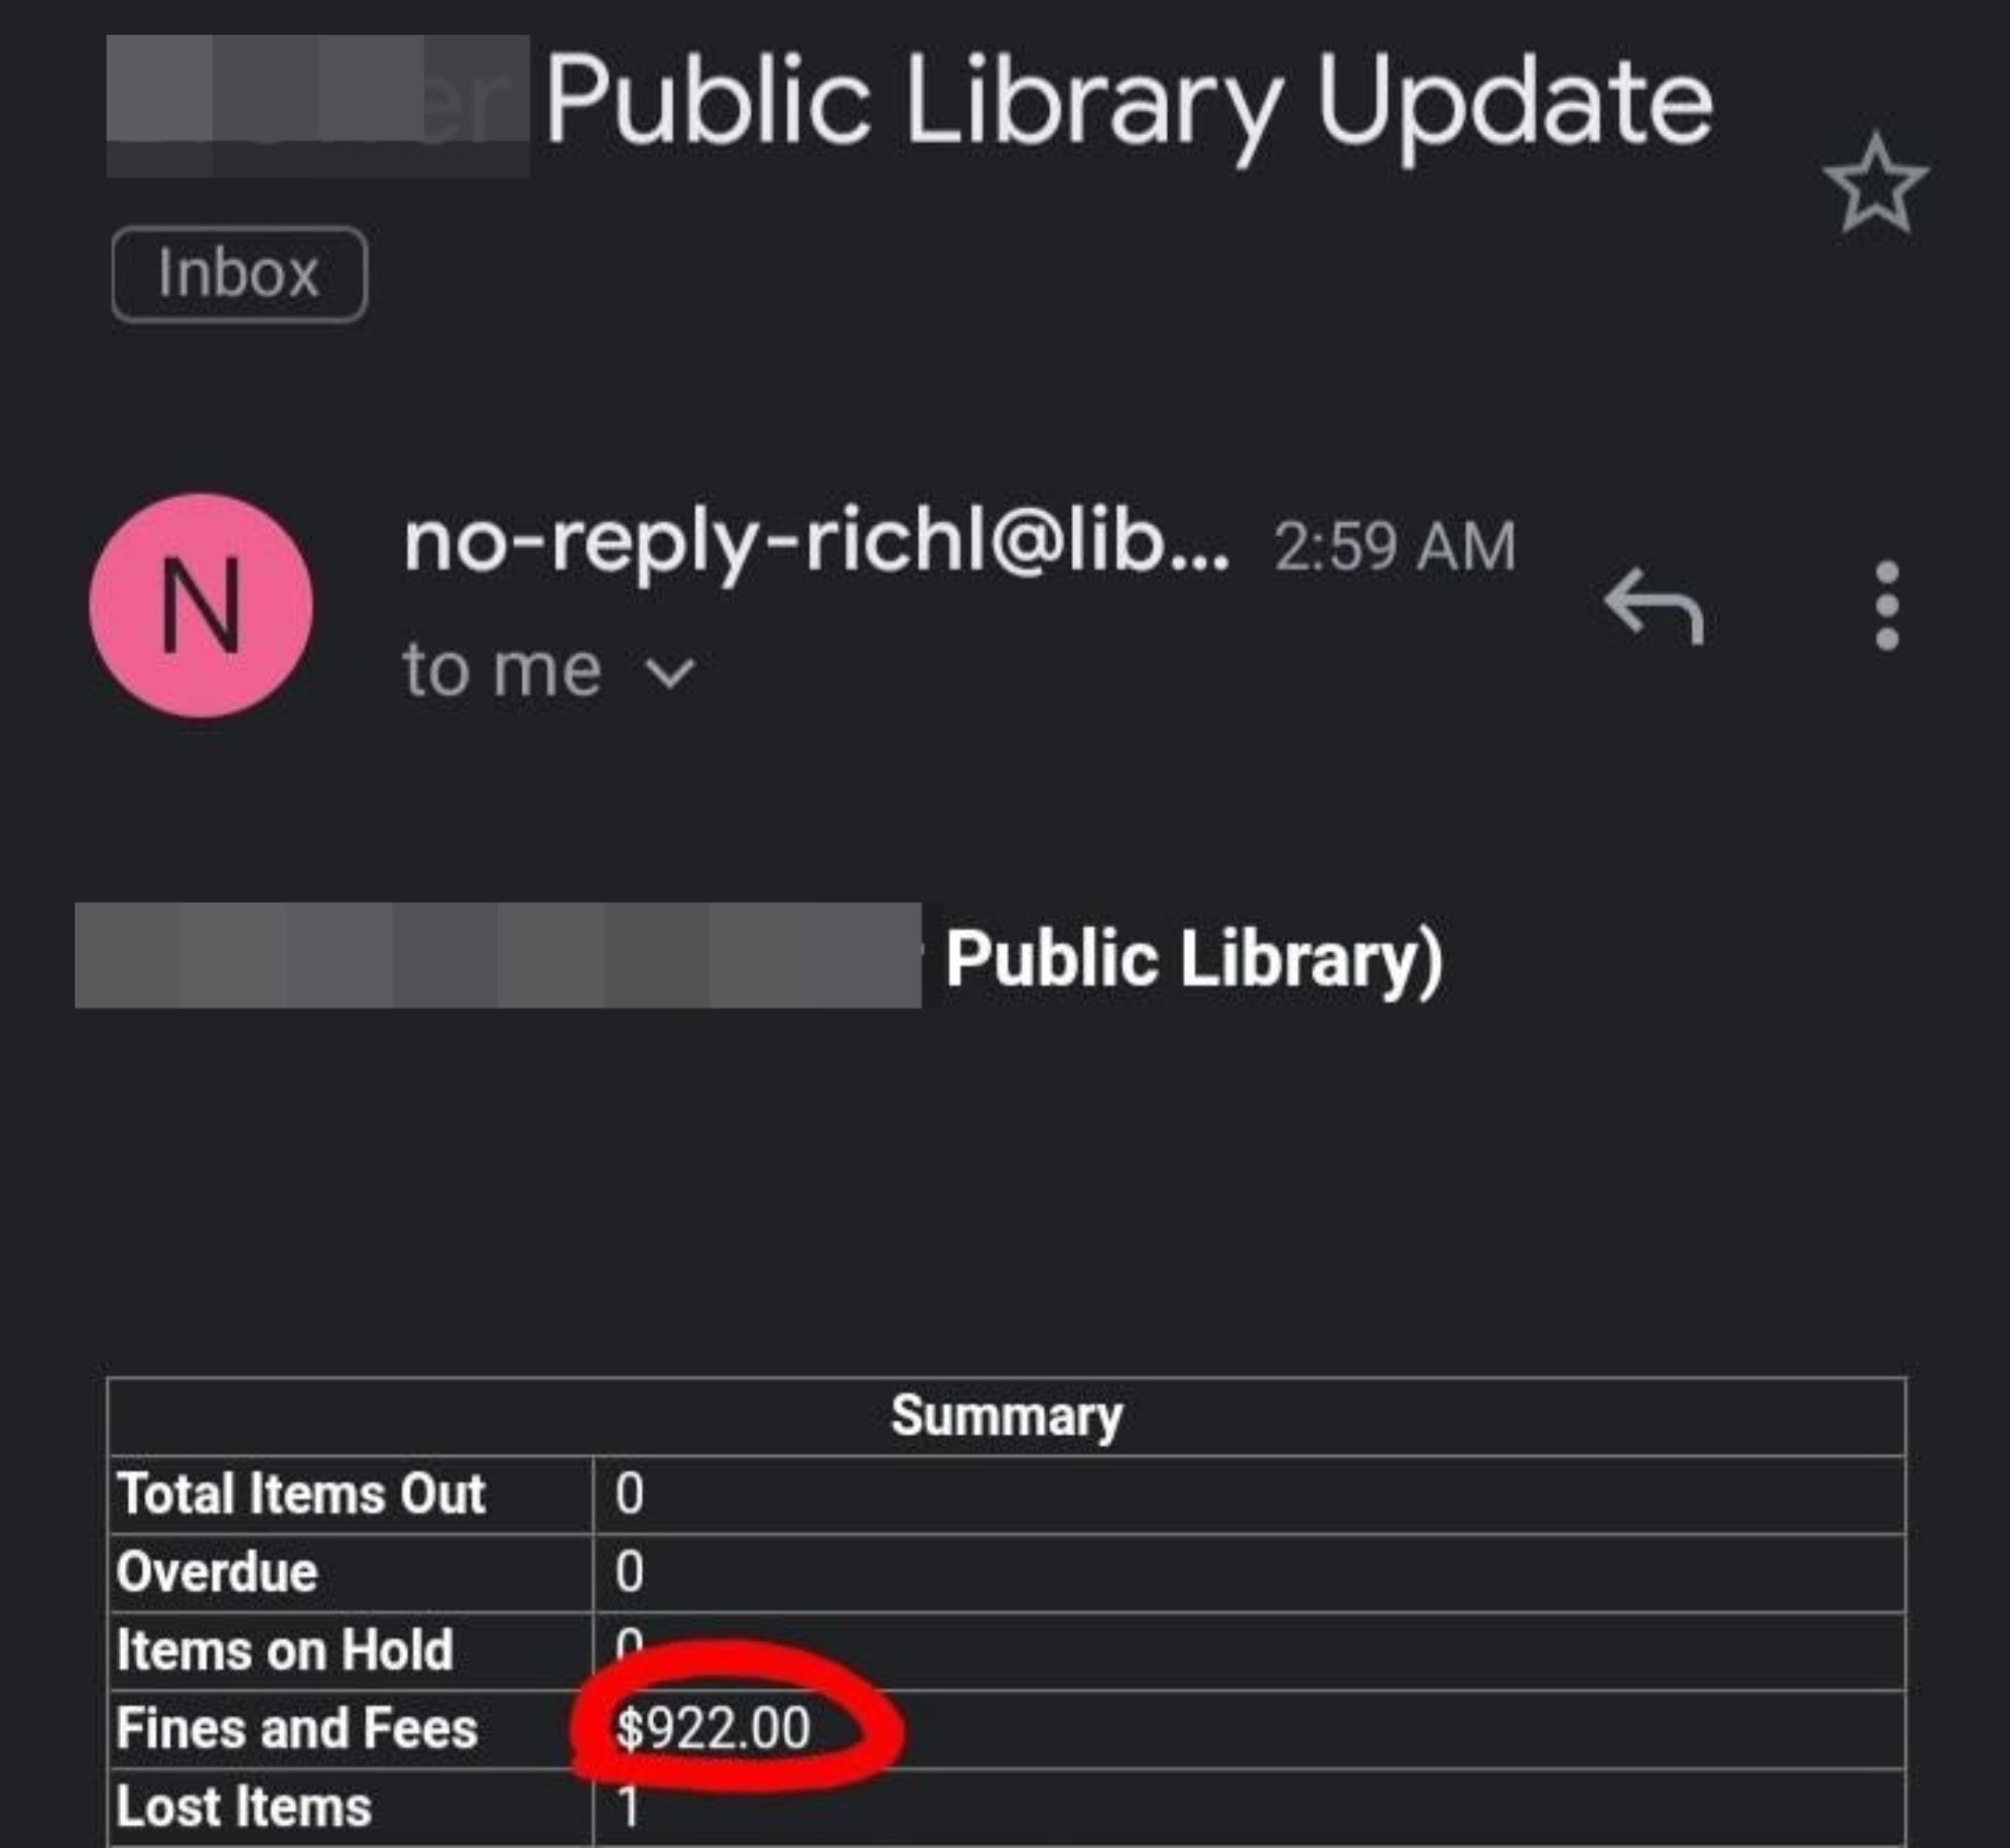 &quot;Public Library Update&quot; shows fines and fees of $922